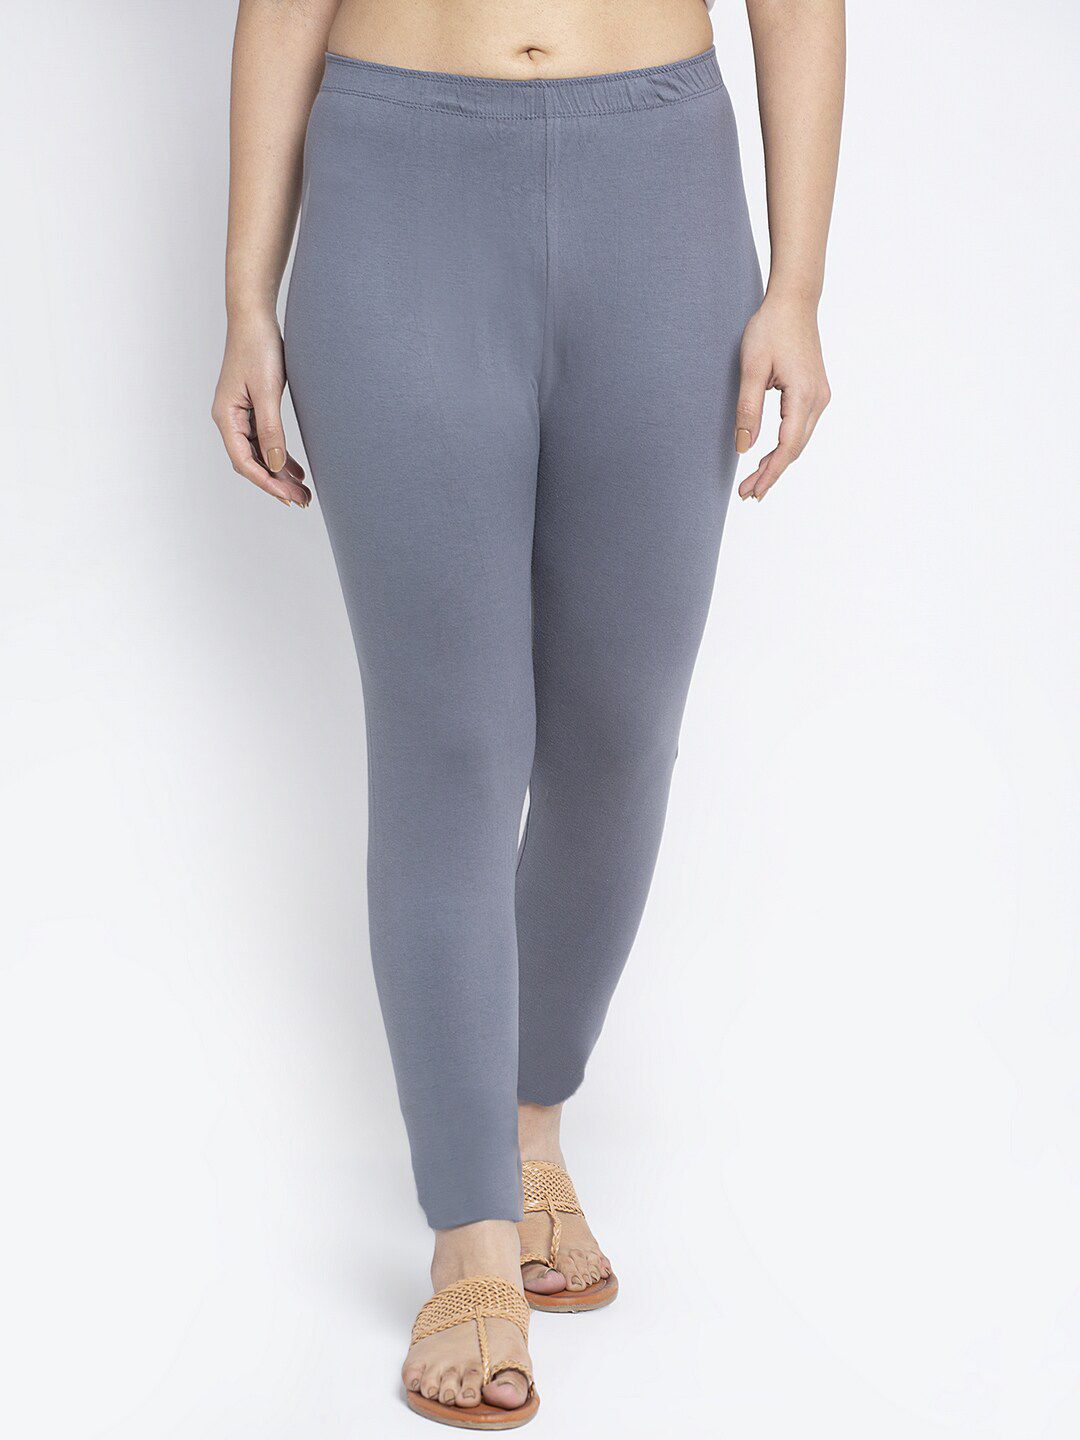 Jinfo Women Grey Cotton Ankle-Length Leggings Price in India